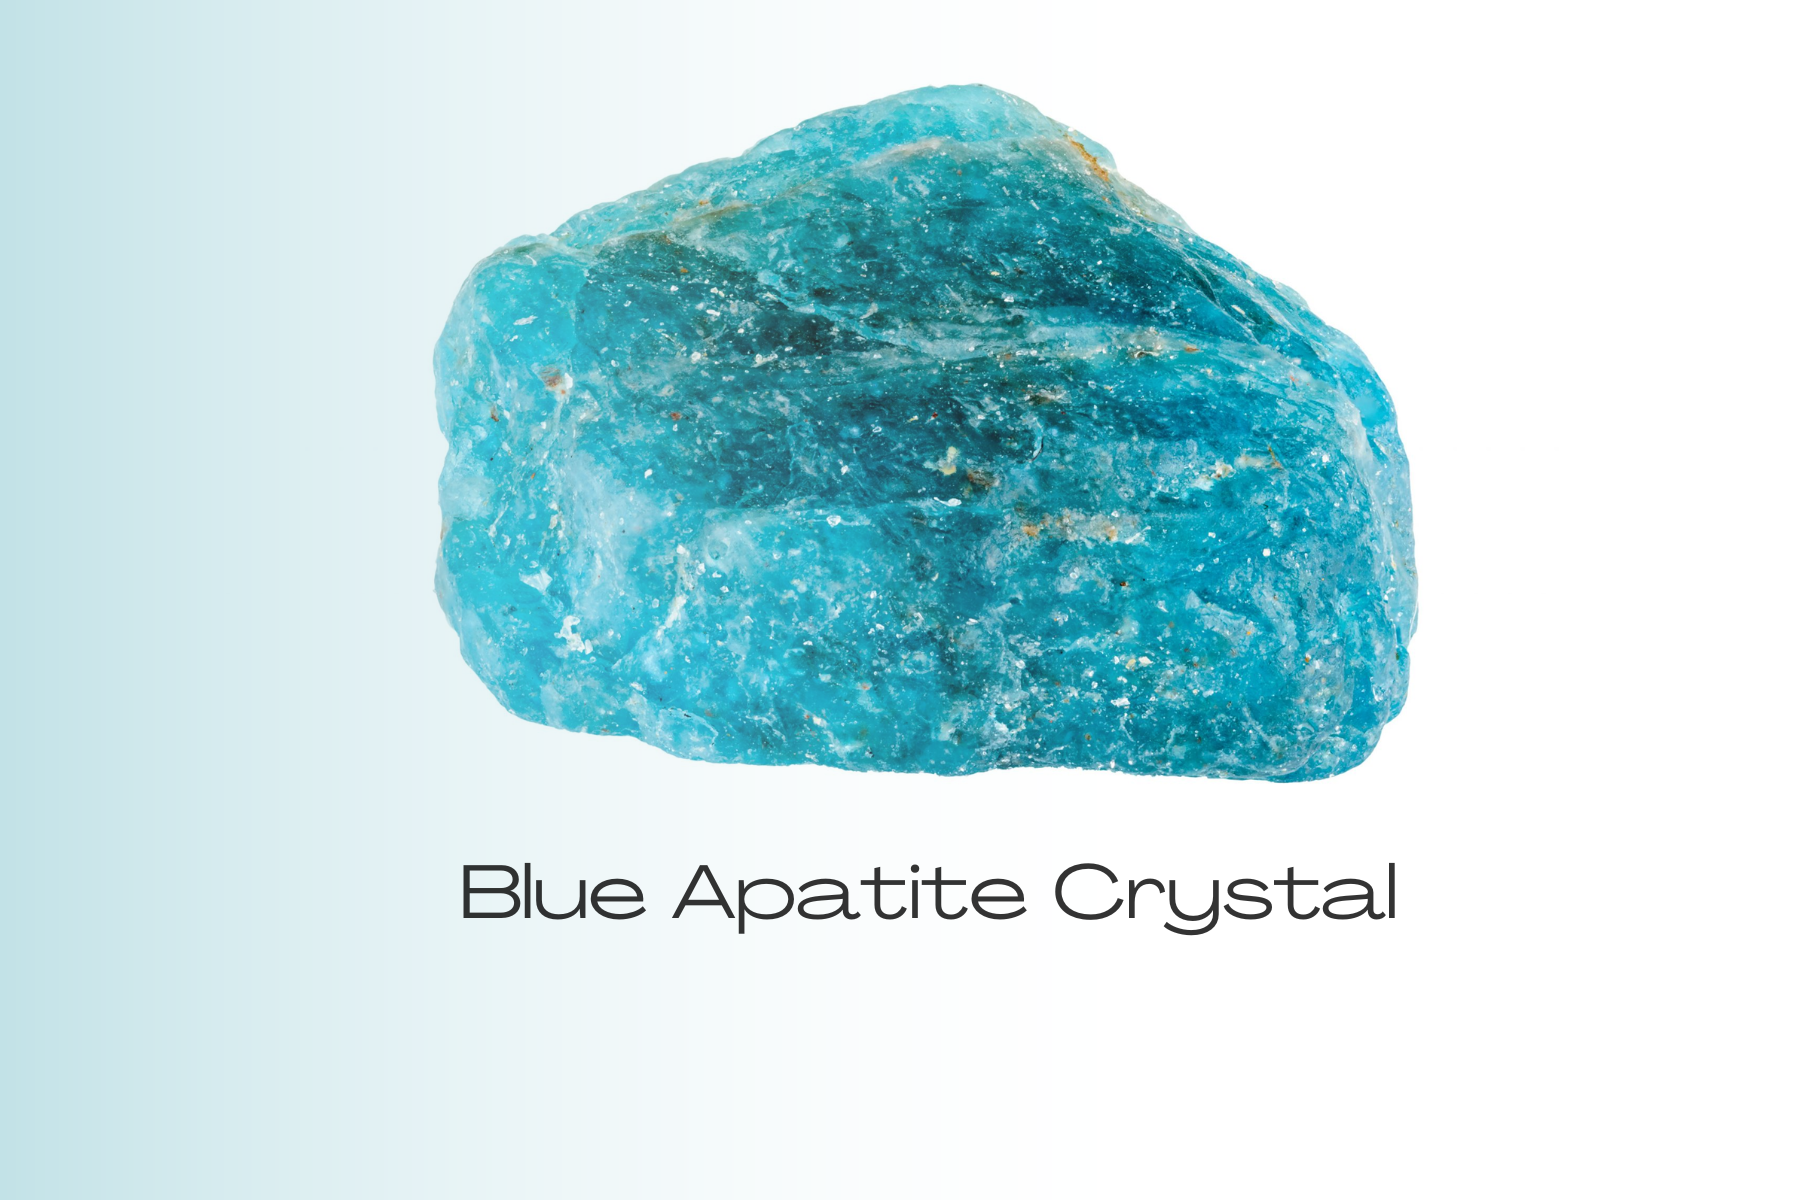 Rock-formed blue apatite stone